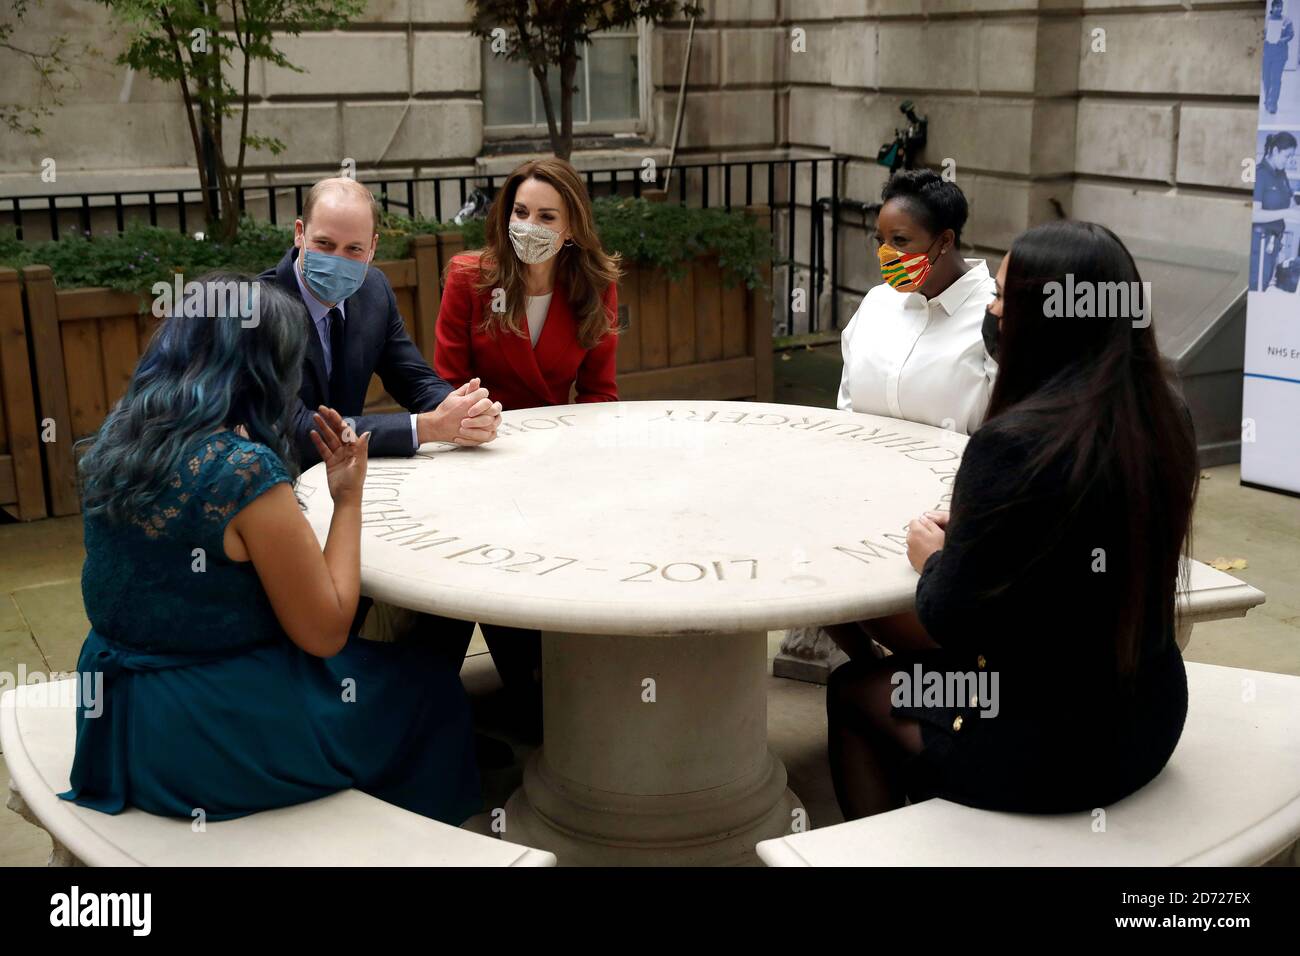 The Duke and Duchess of Cambridge meet pharmacist Joyce Duah (second right), and pharmacy technicians Amelia Chowdhury (right) and Dipal Samuel (left) during a visit to St. Bartholomew's Hospital in London, to mark the launch of the Hold Still photography project. Stock Photo